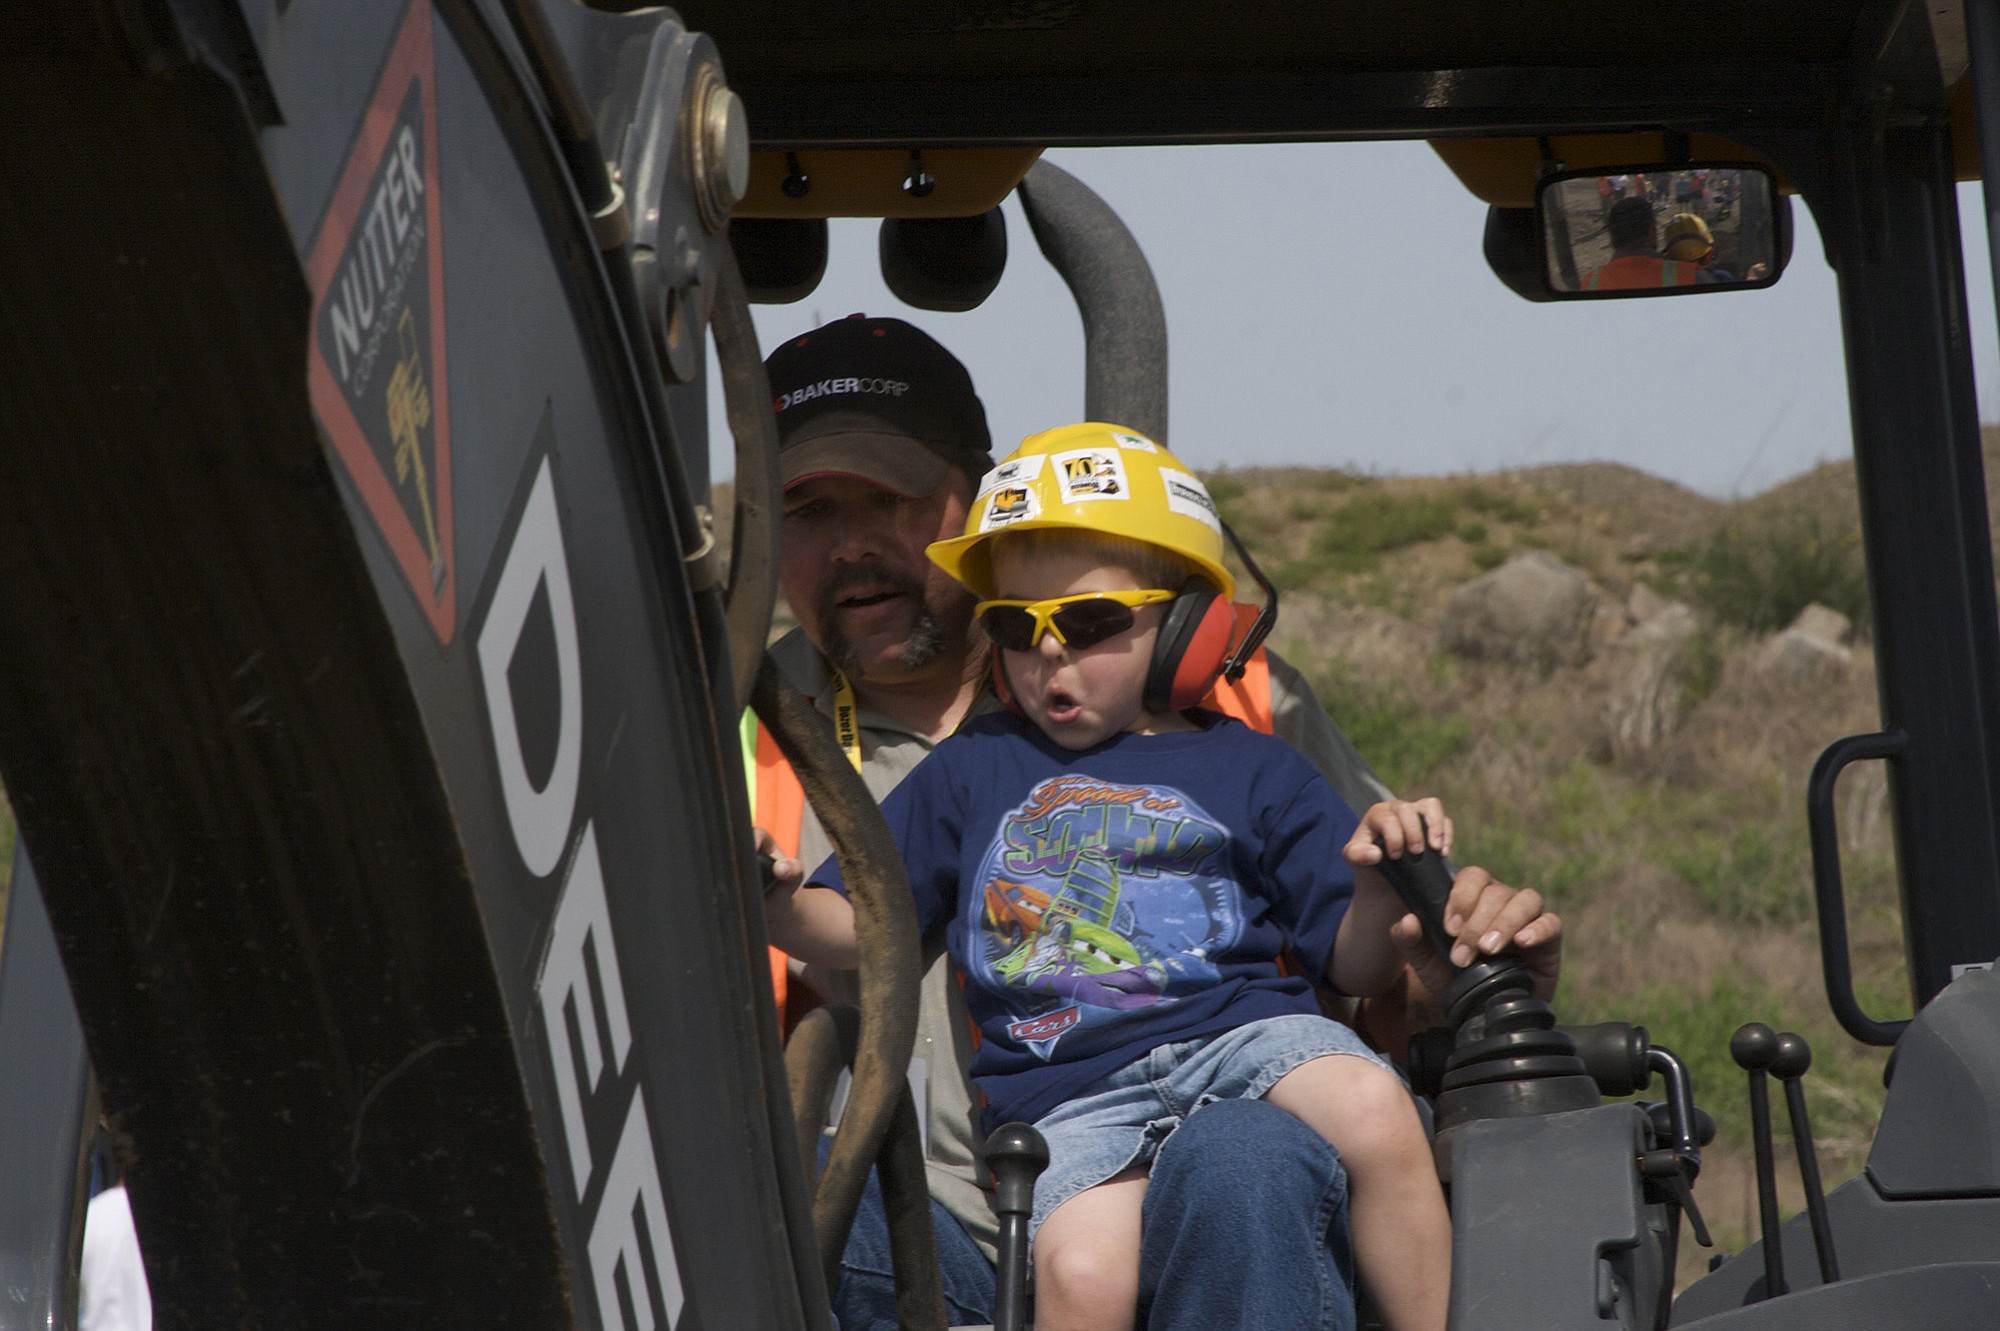 Dozer Day continues to expand this year with more activities and some new events on the way.